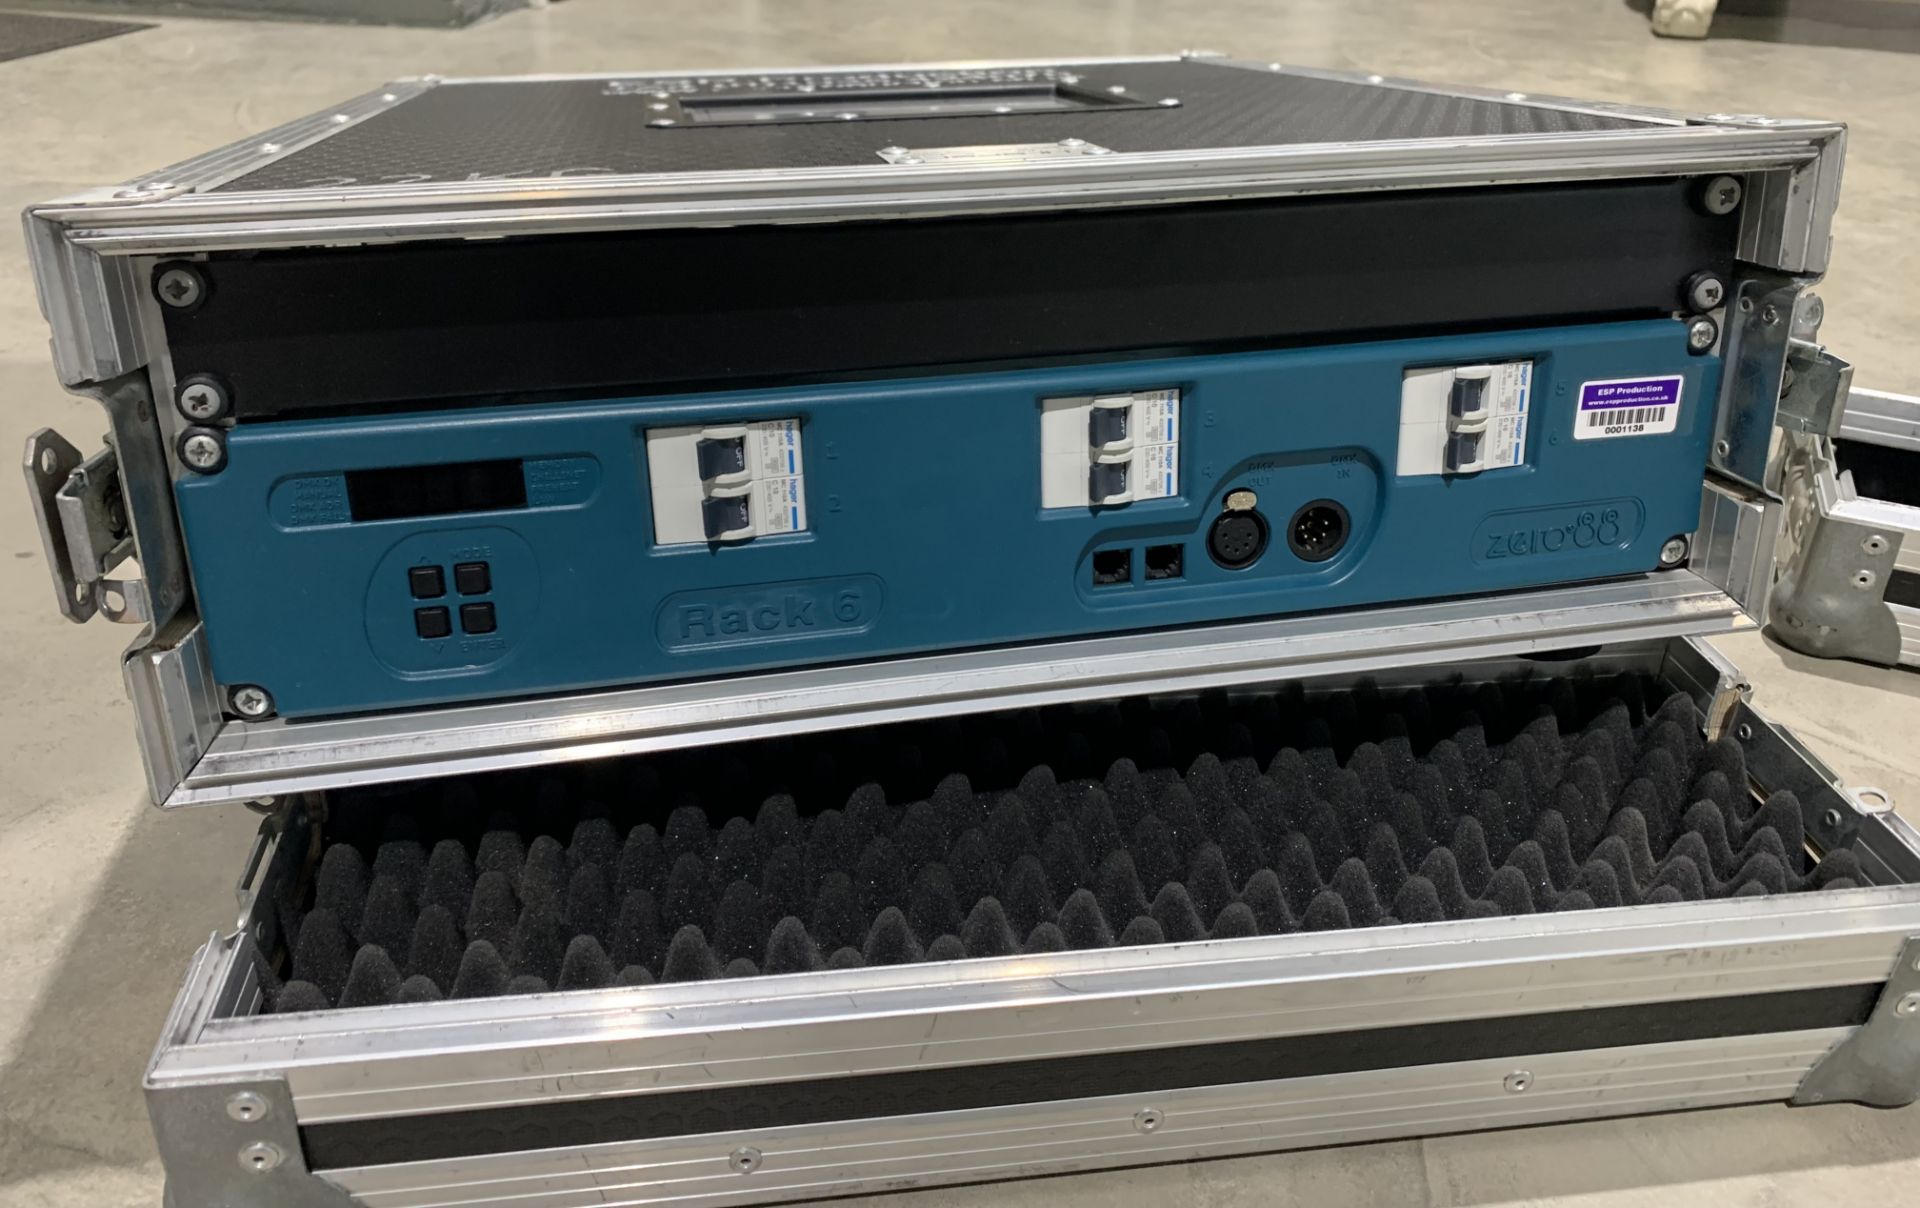 Zero 88 Dimmer Pack in Rack Case - Rack 6 Condition: Ex-Hire Zero 88 Rack 6 Dimmer Rack with Solid